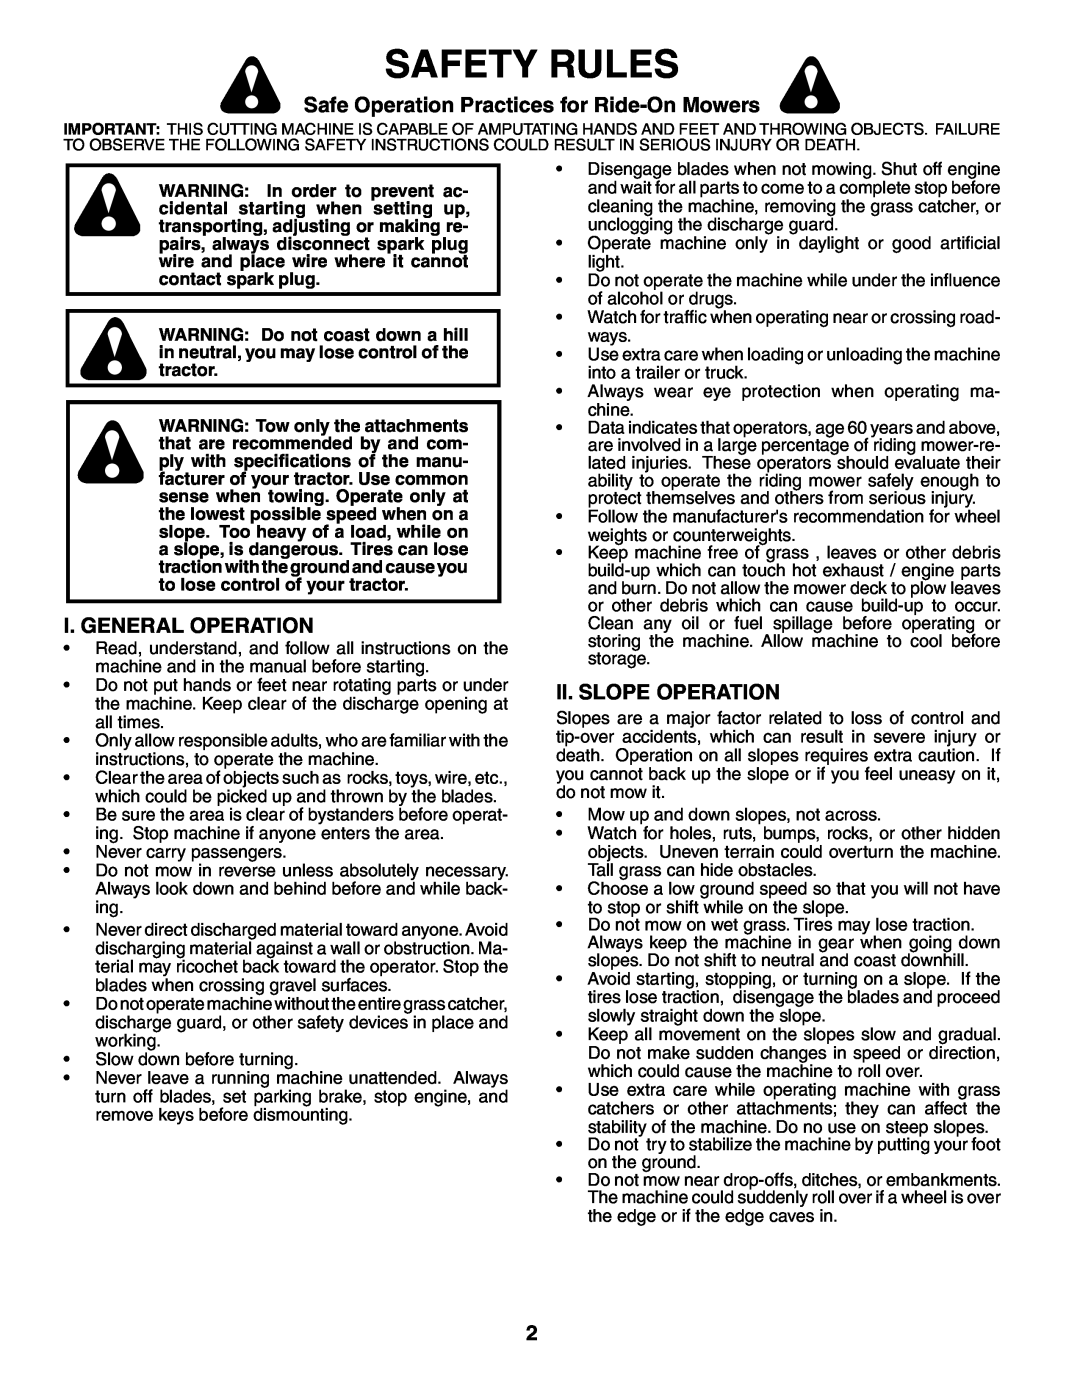 McCulloch MC175H42STA Safety Rules, Safe Operation Practices for Ride-On Mowers, I. General Operation, Ii. Slope Operation 